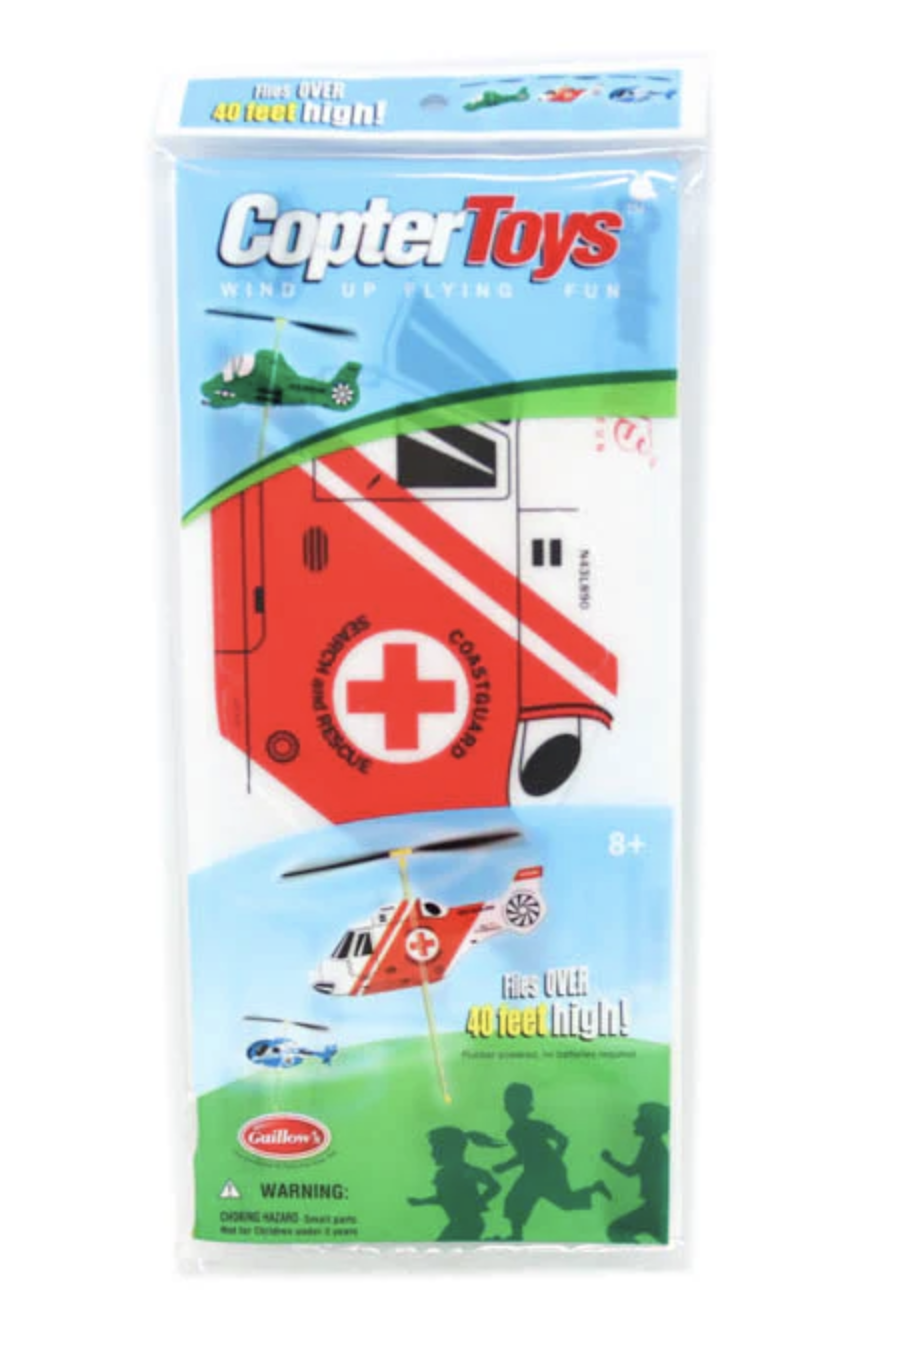 Copter Toy (Guillow's)